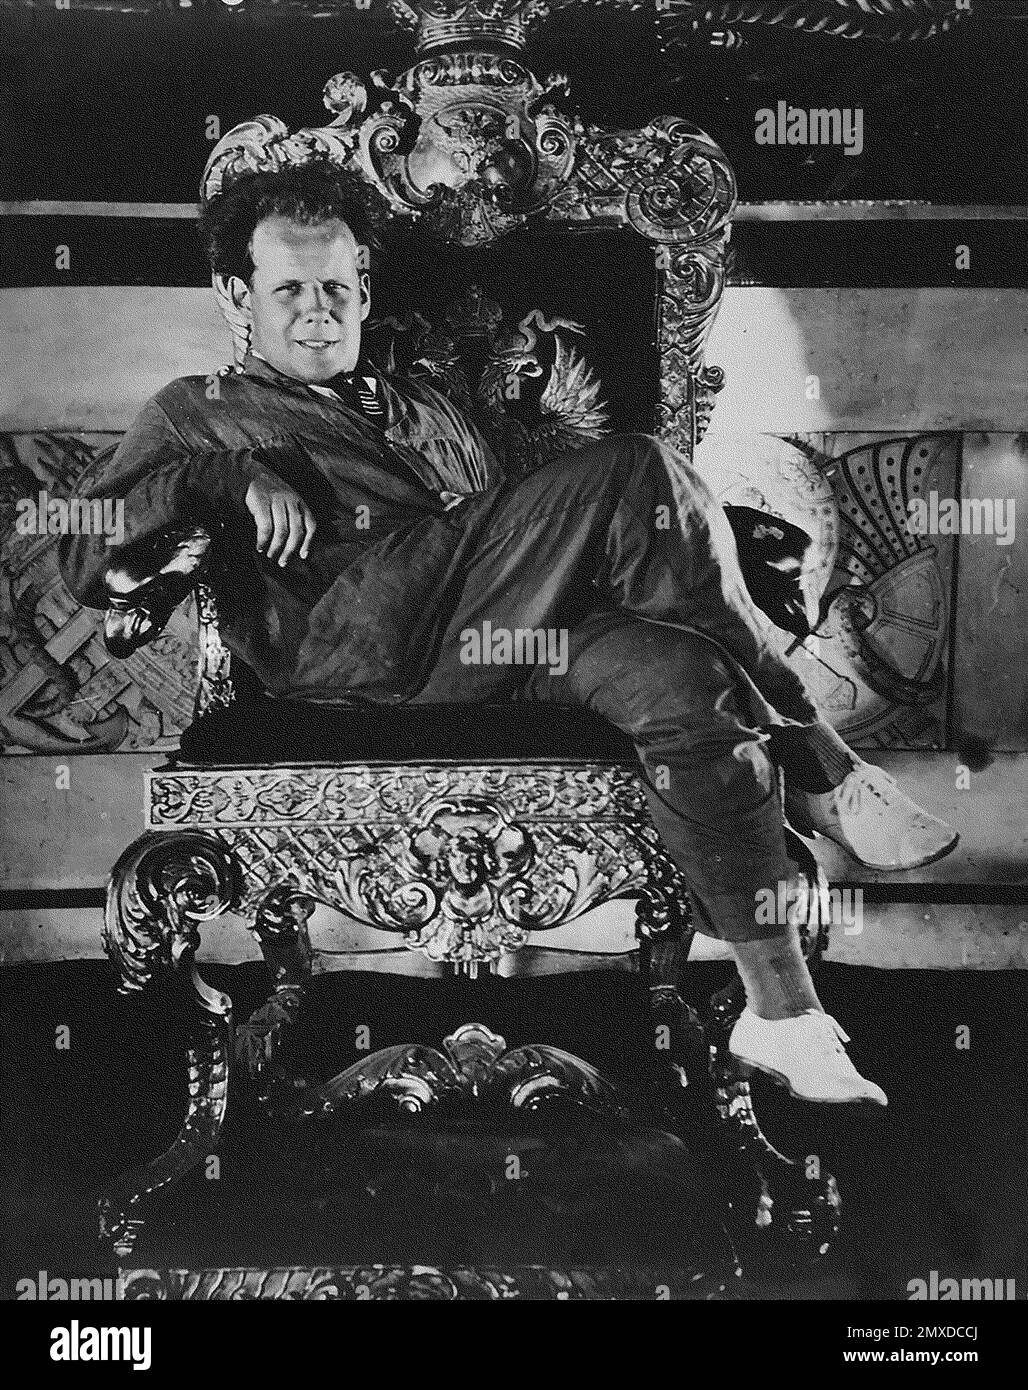 Sergei Eisenstein (1898-1948) during the production of 'October'. Museum: PRIVATE COLLECTION. Author: Alexander Sigayev. Stock Photo